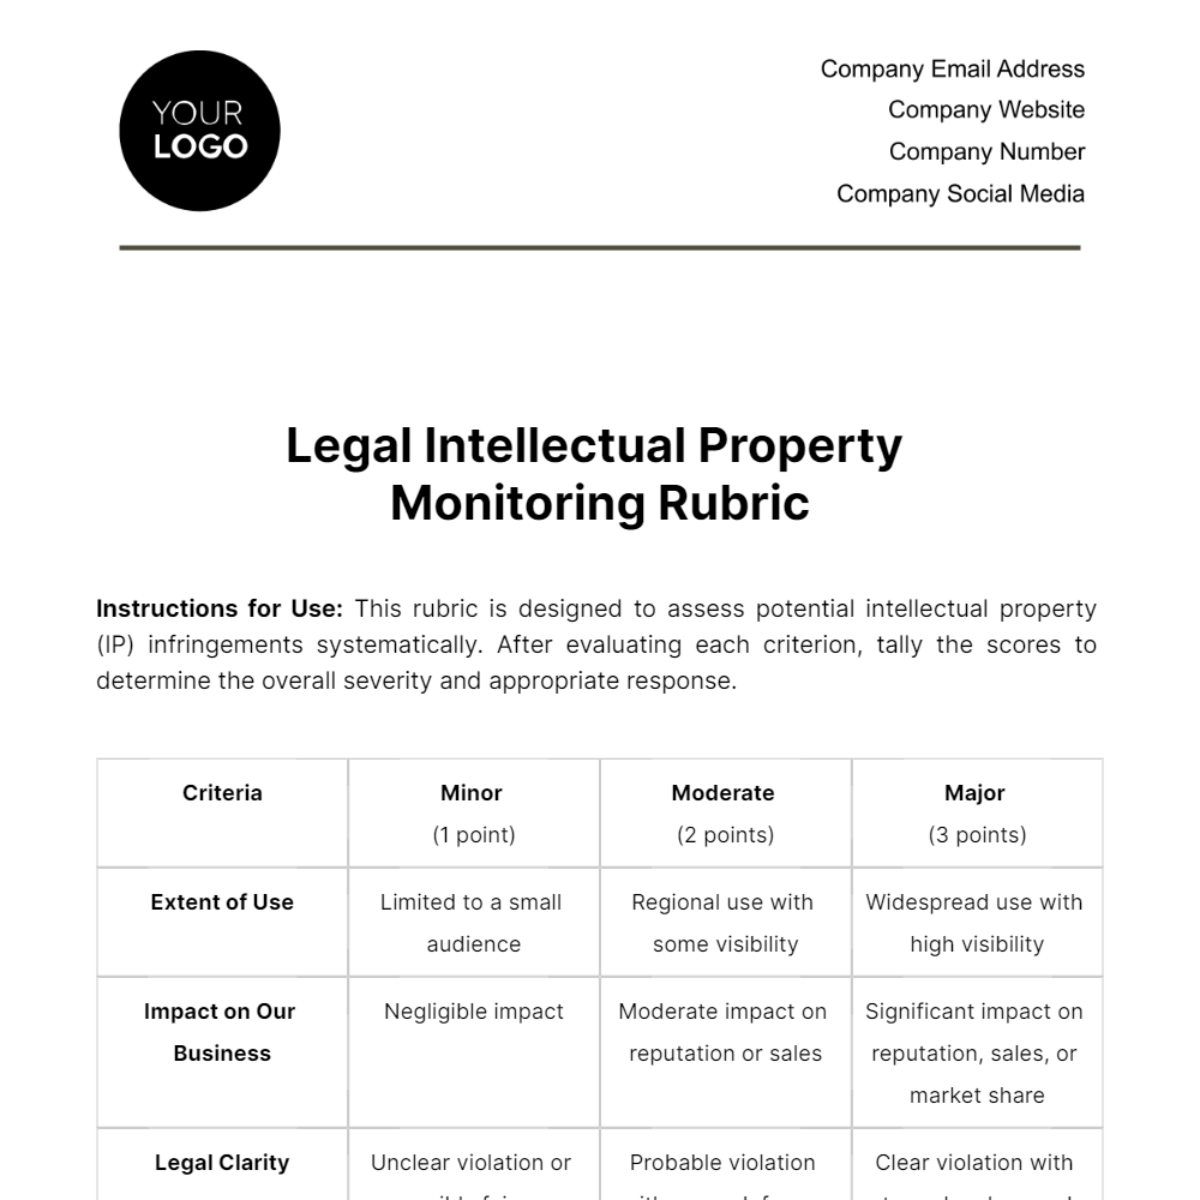 Free Legal Intellectual Property Monitoring Rubric Template